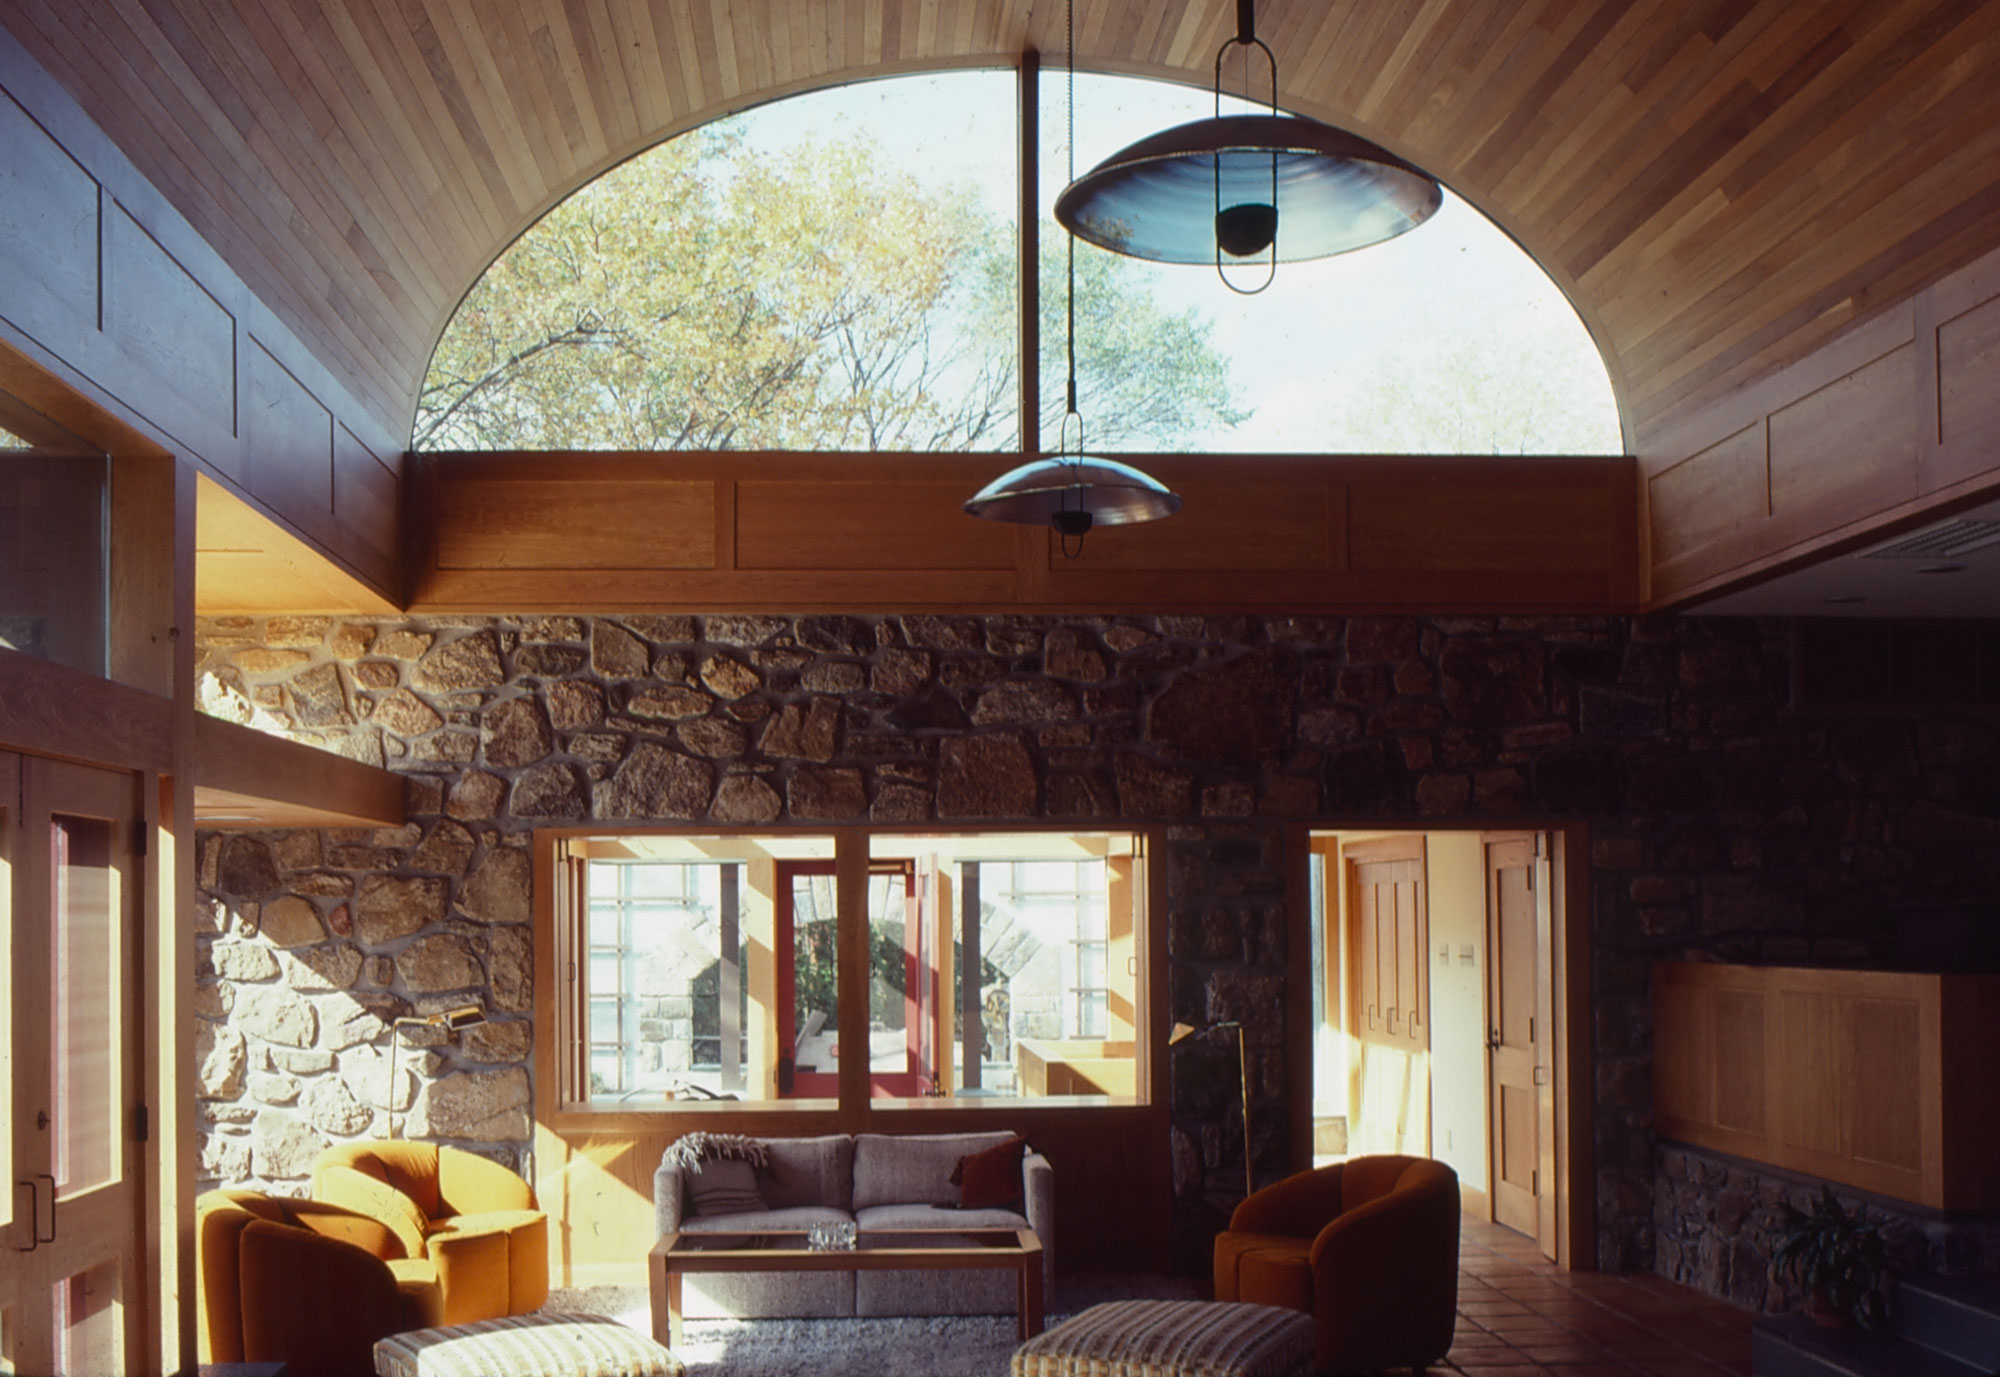 Color slide showing interior of house with large windows and wood paneling